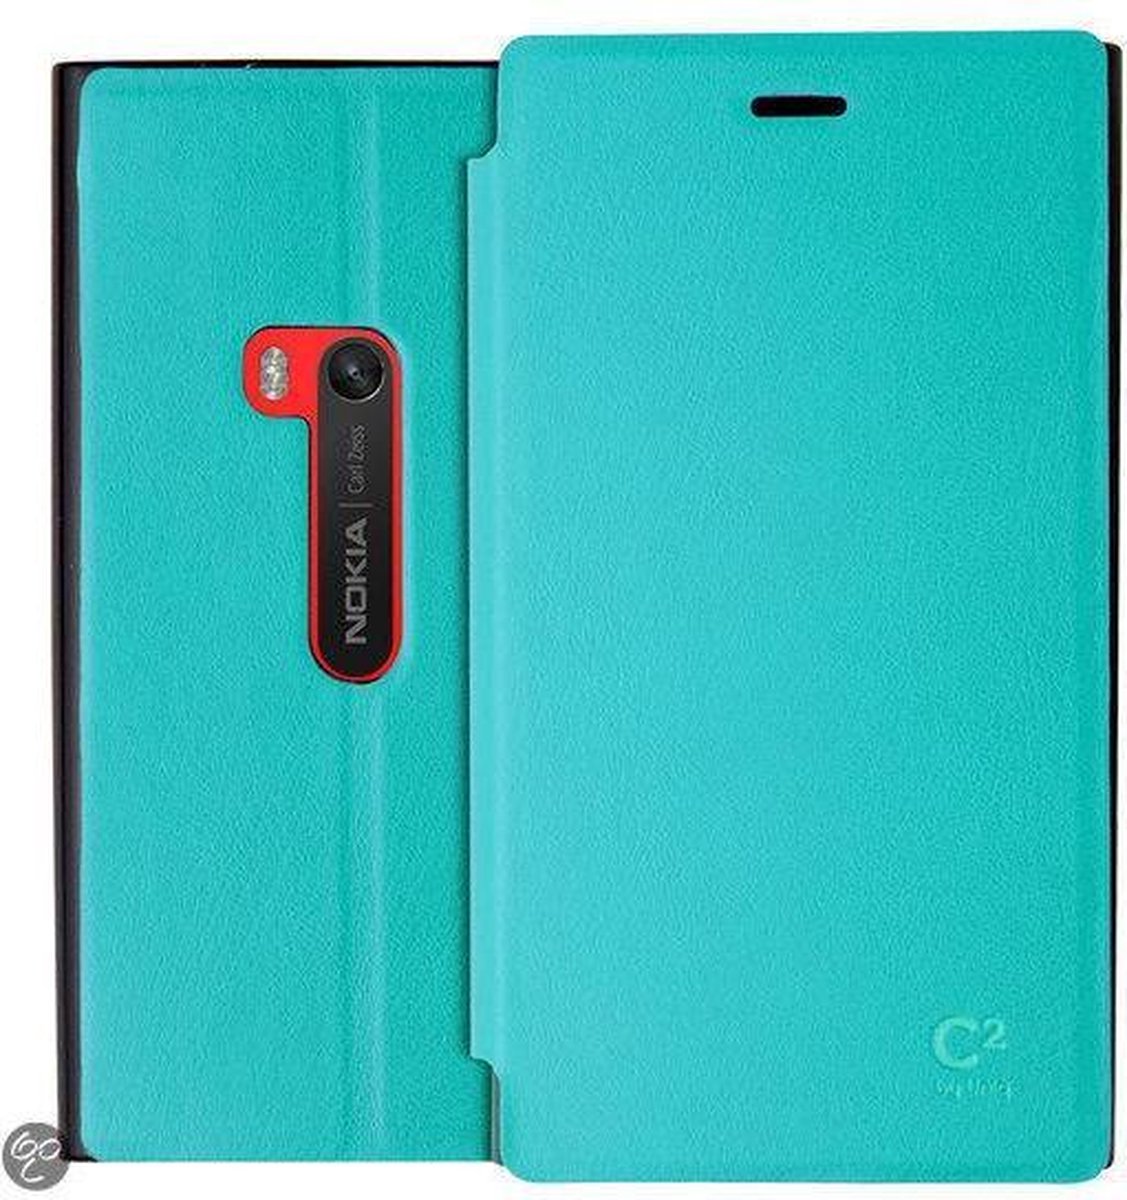 Uniq - C2 Voor Nokia Lumia 920 - Chill Out Turquoise